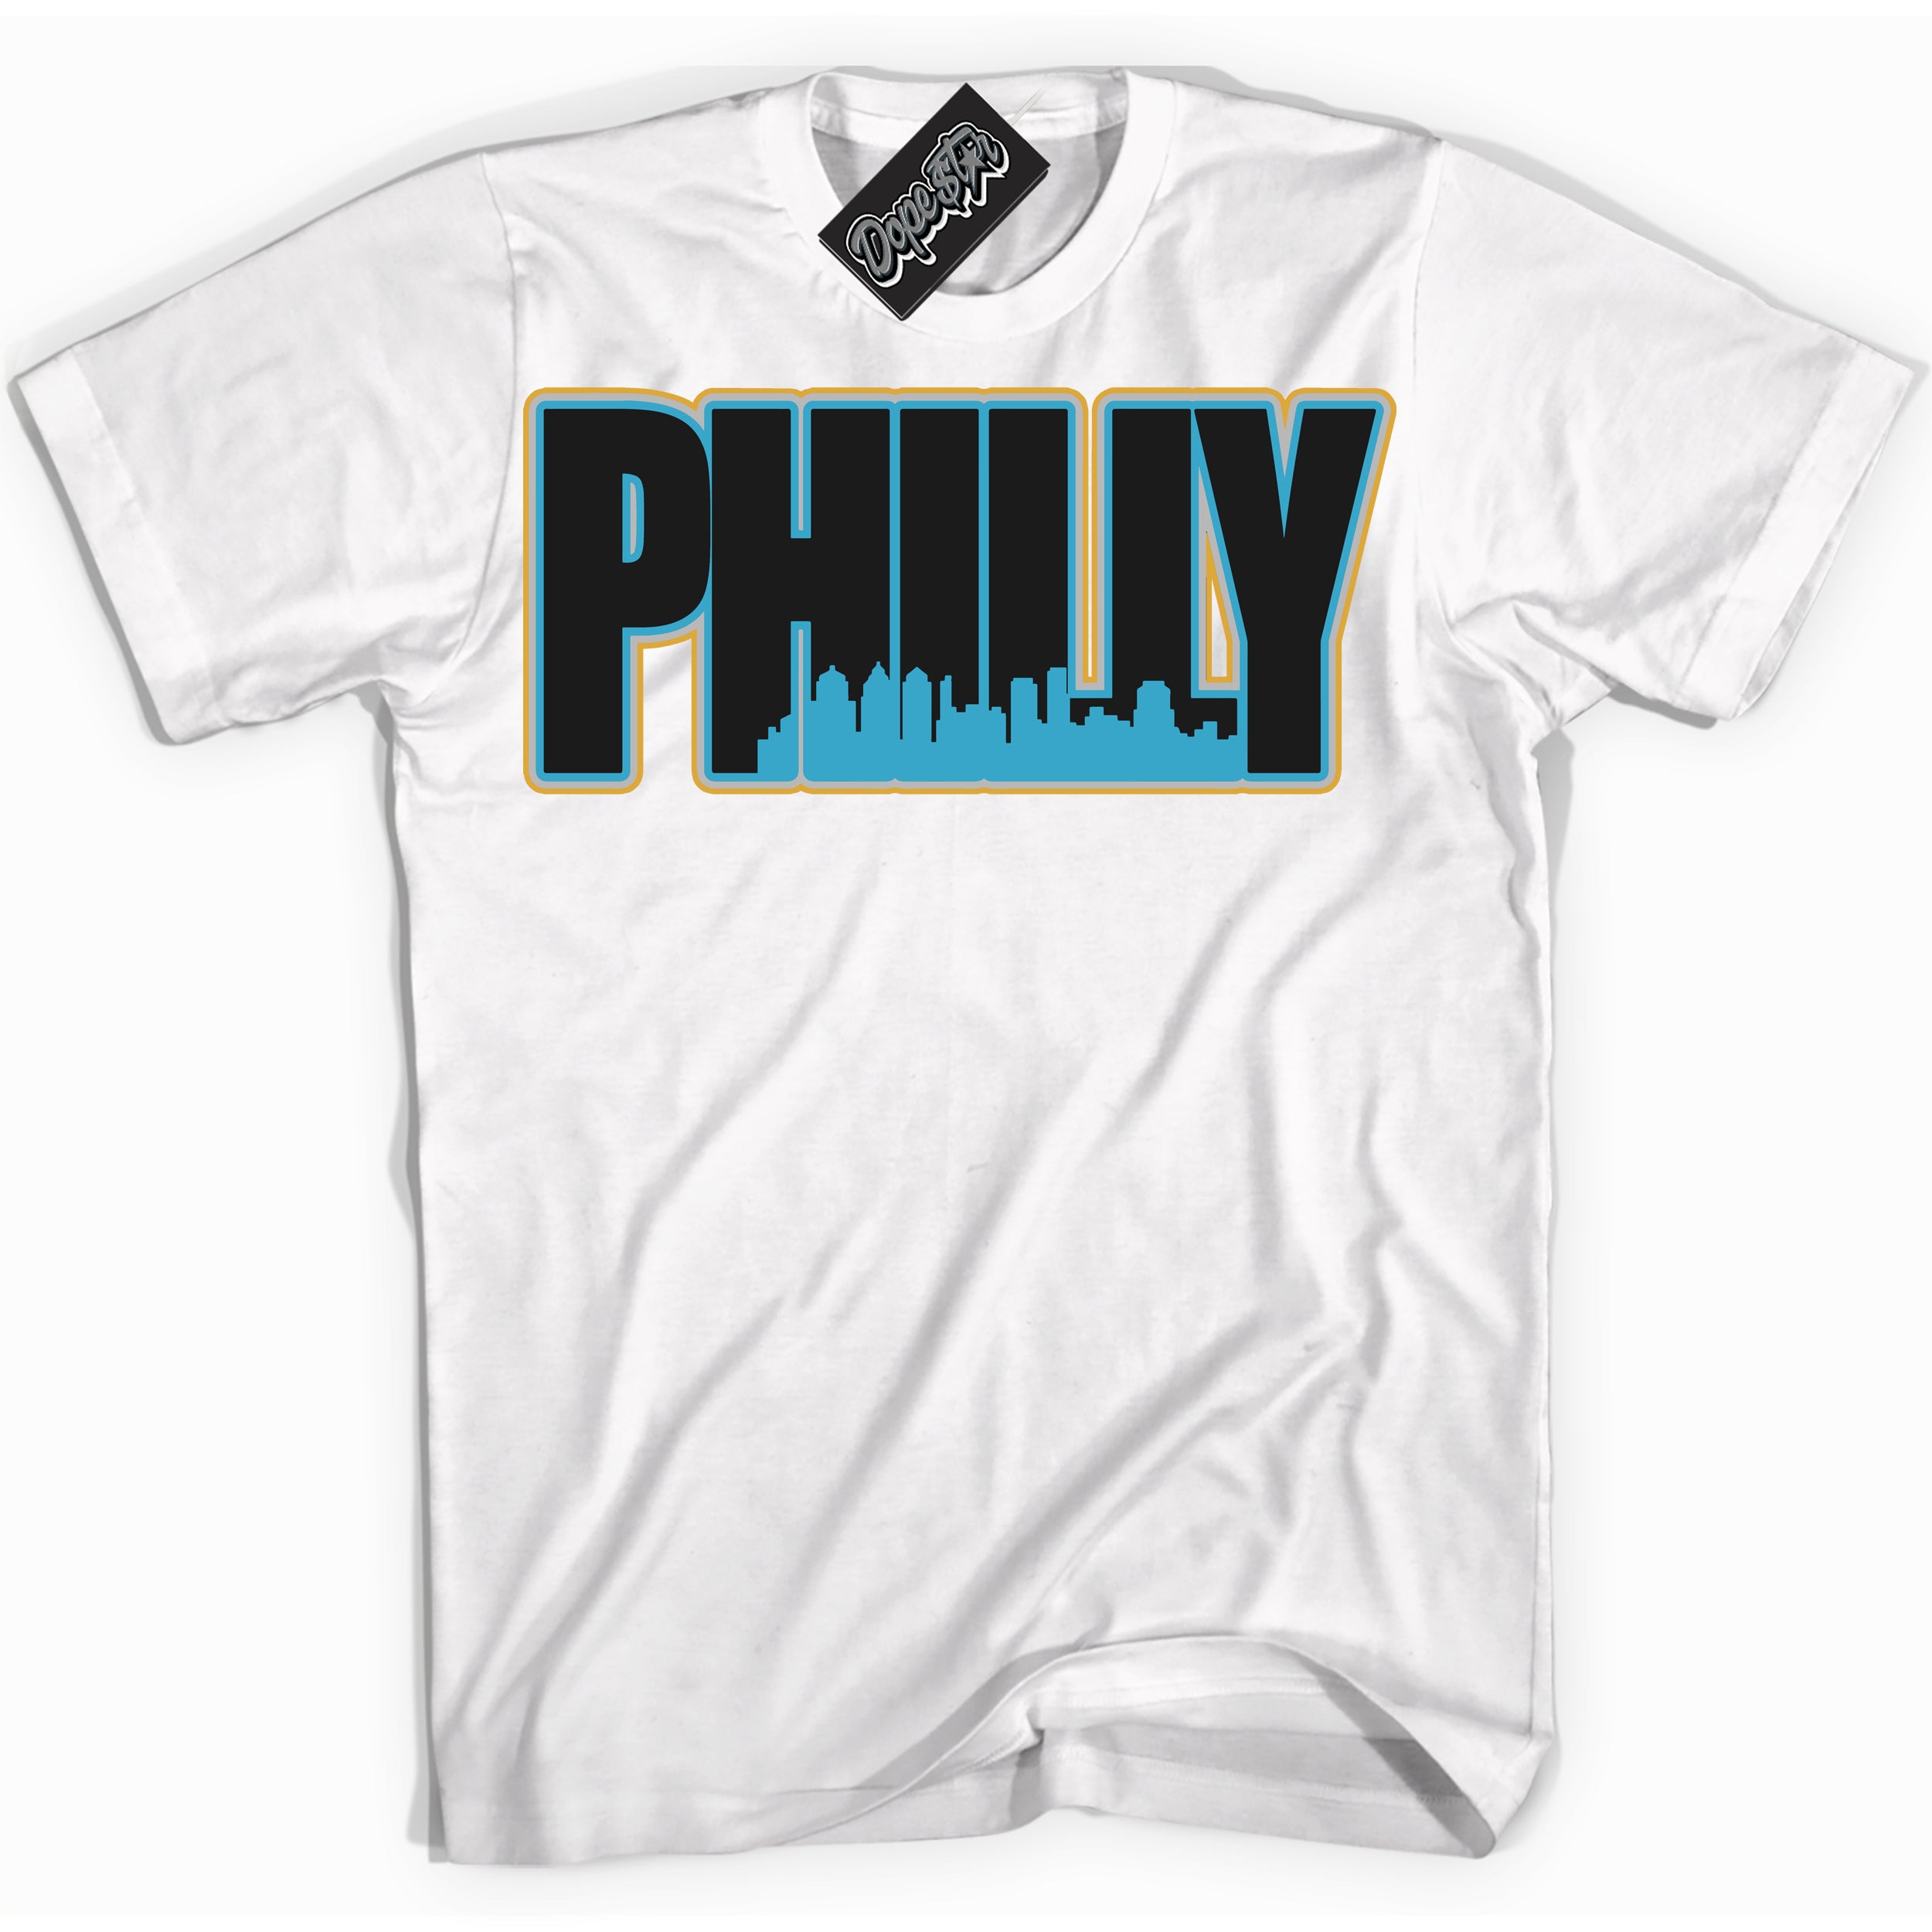 Cool White Shirt with “ Philly” design that perfectly matches Aqua 5s Sneakers.